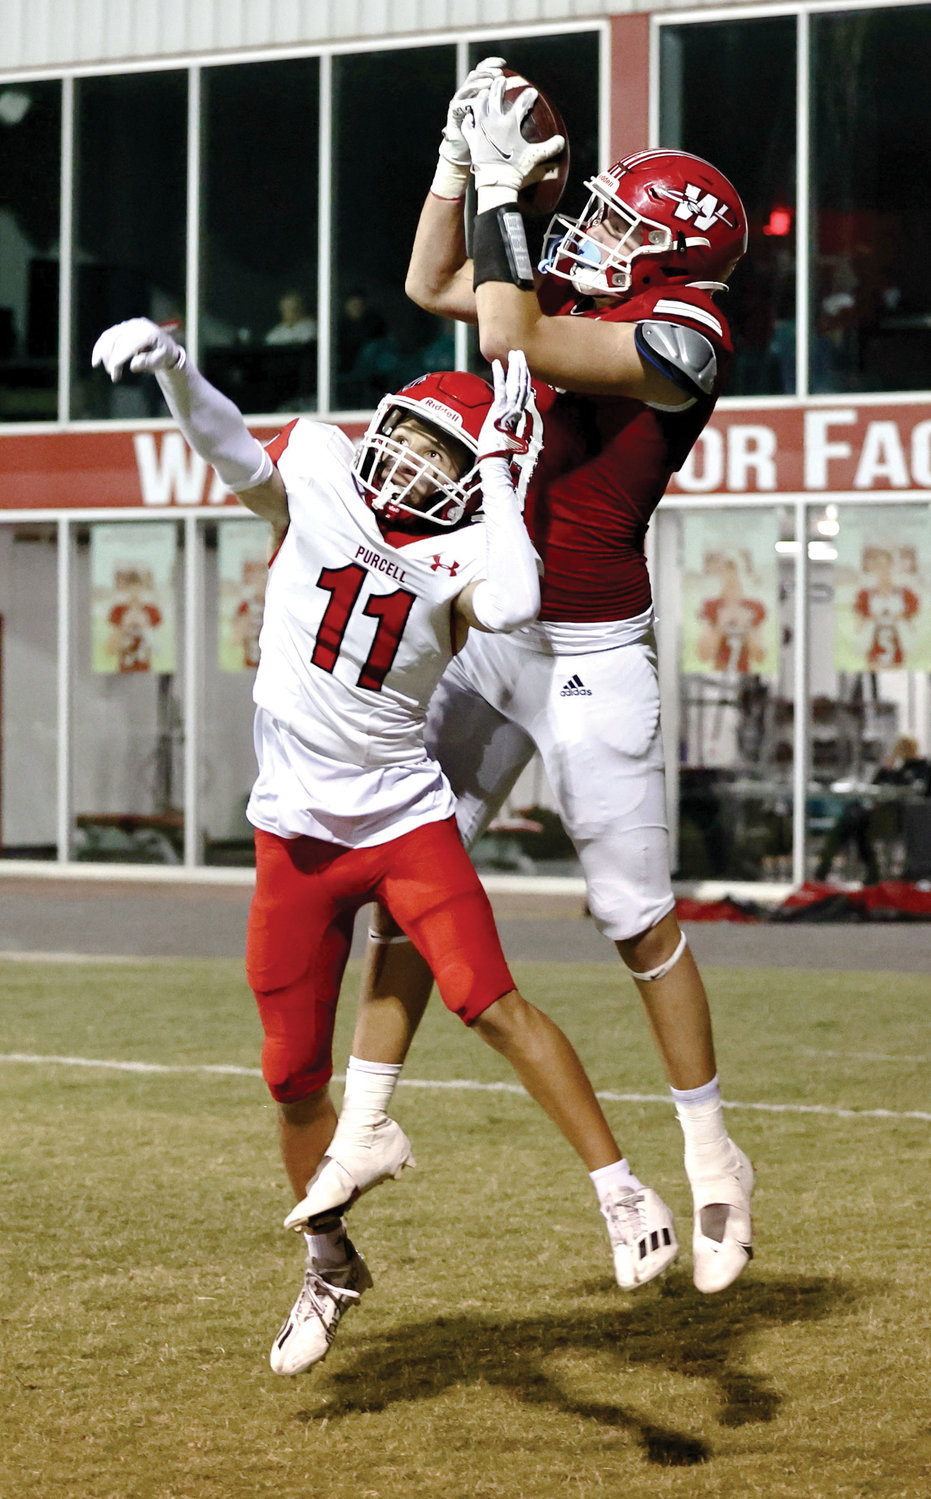 Washington sophomore Nate Roberts catches a touchdown pass over the top of Purcell’s Ty Jaspersen Friday night during the Warriors’ 40-7 win over the Dragons.